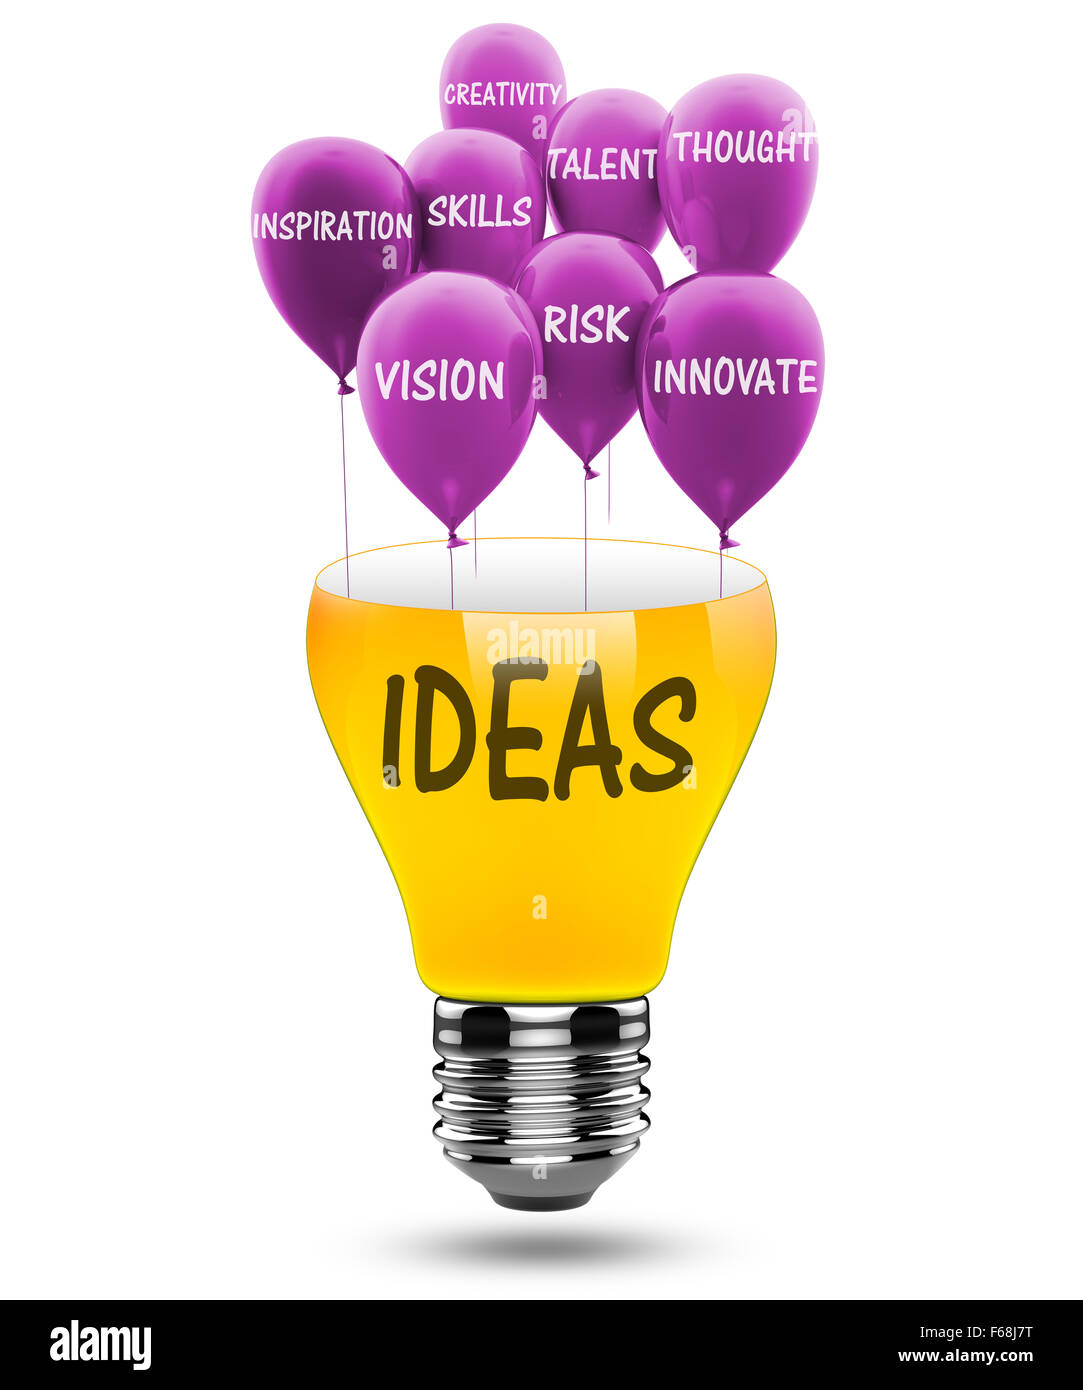 Ideas, skills and knowledge as a concept Stock Photo